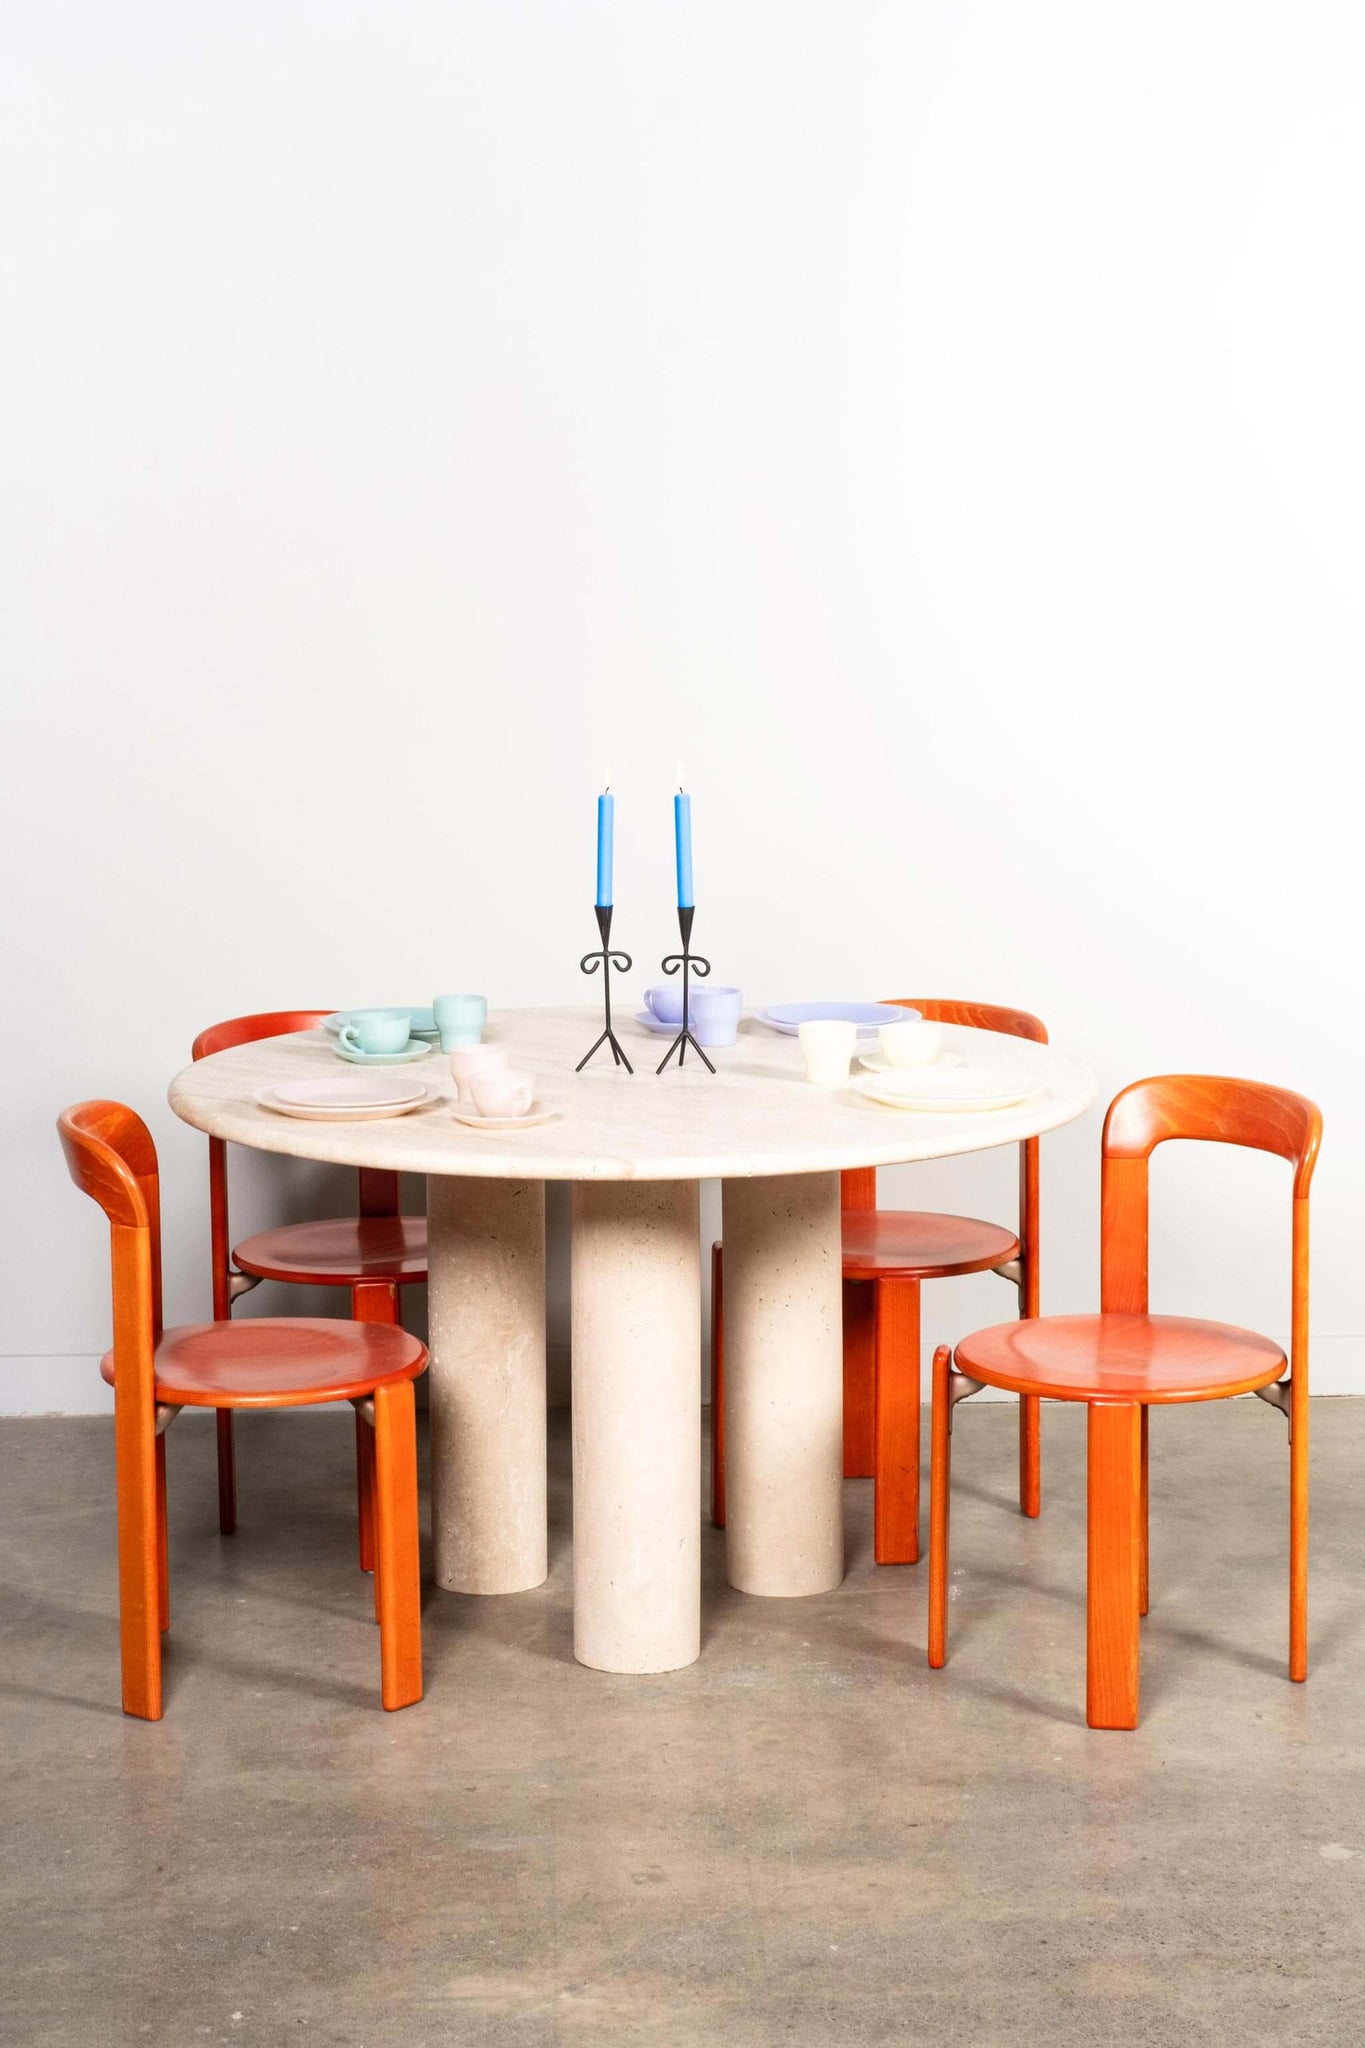 Vintage Italian Natural Travertine 3-Pedestal Table, shown with chairs and a set table top